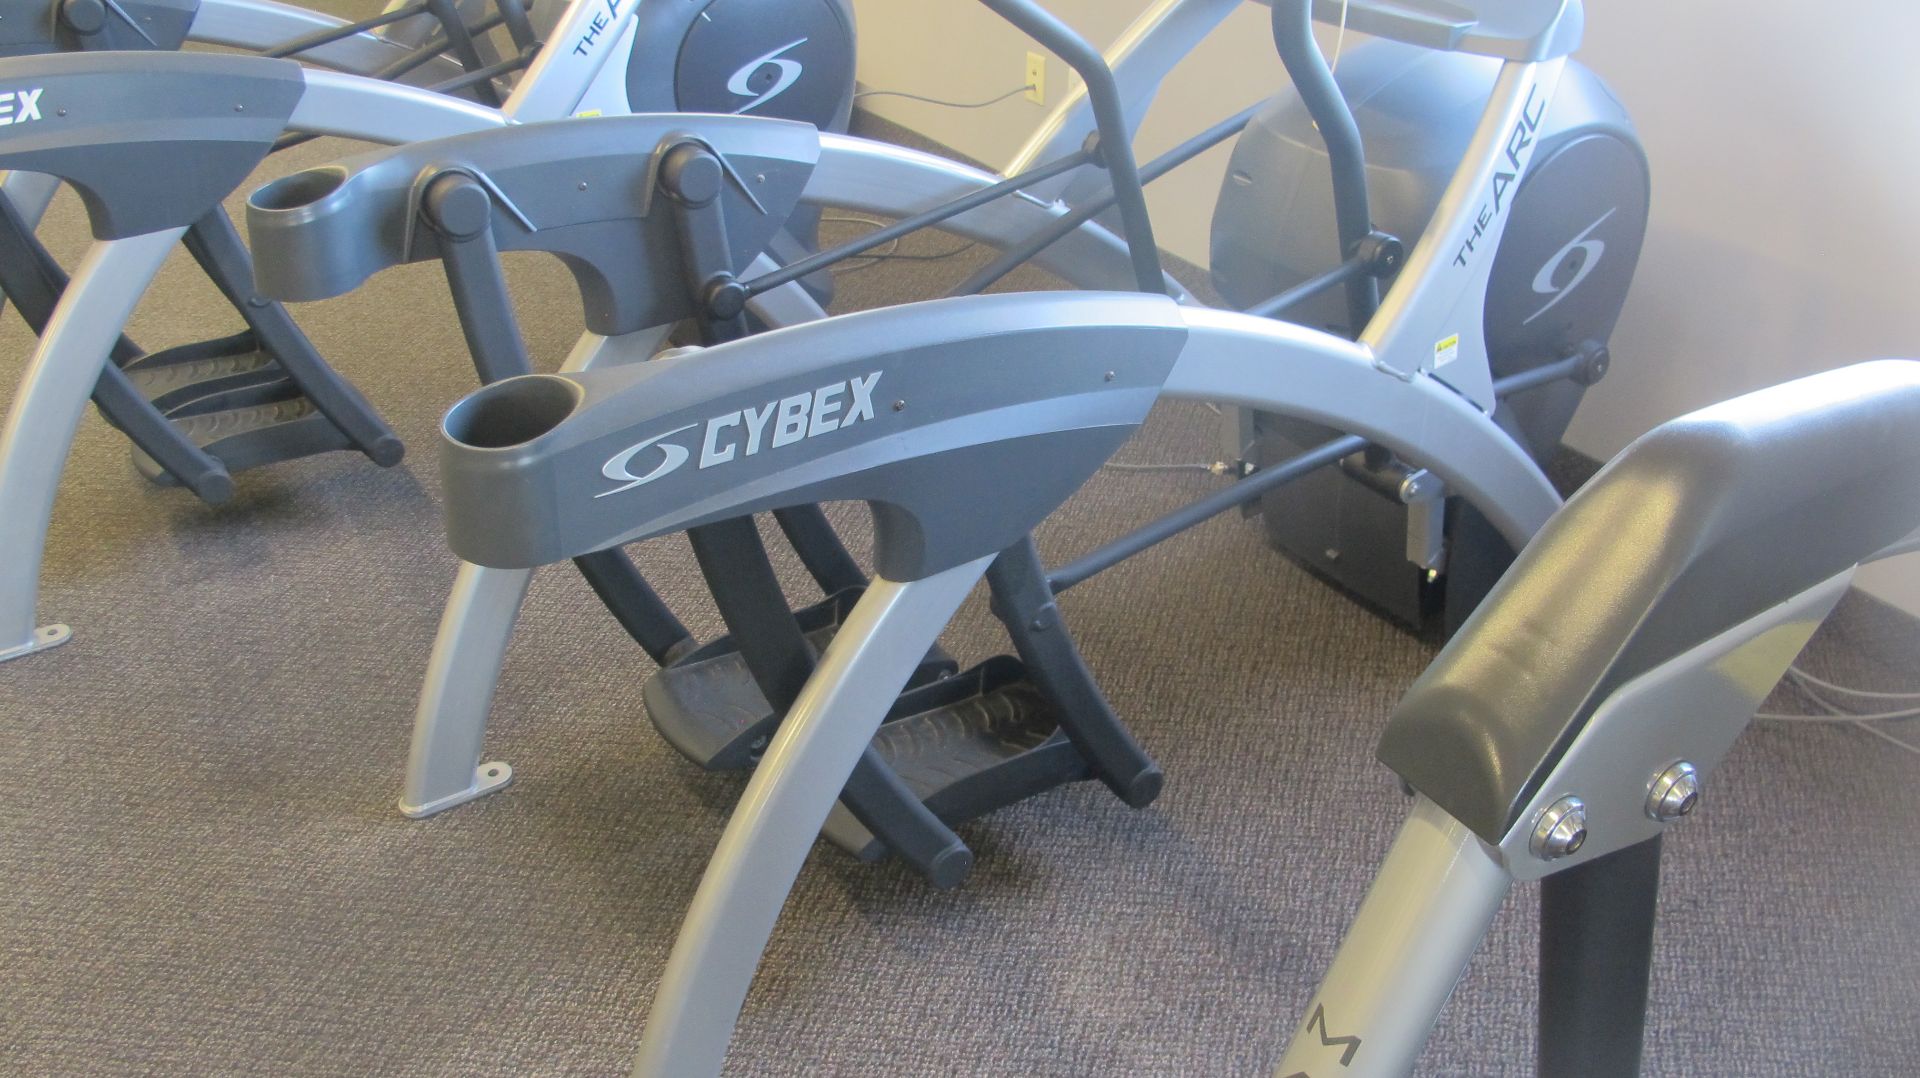 CYBEX "THE ARC" 750AT Arc Trainer w/ TV Screen w/ Satellite Hookup, Digital Display, S/N: - Image 5 of 11